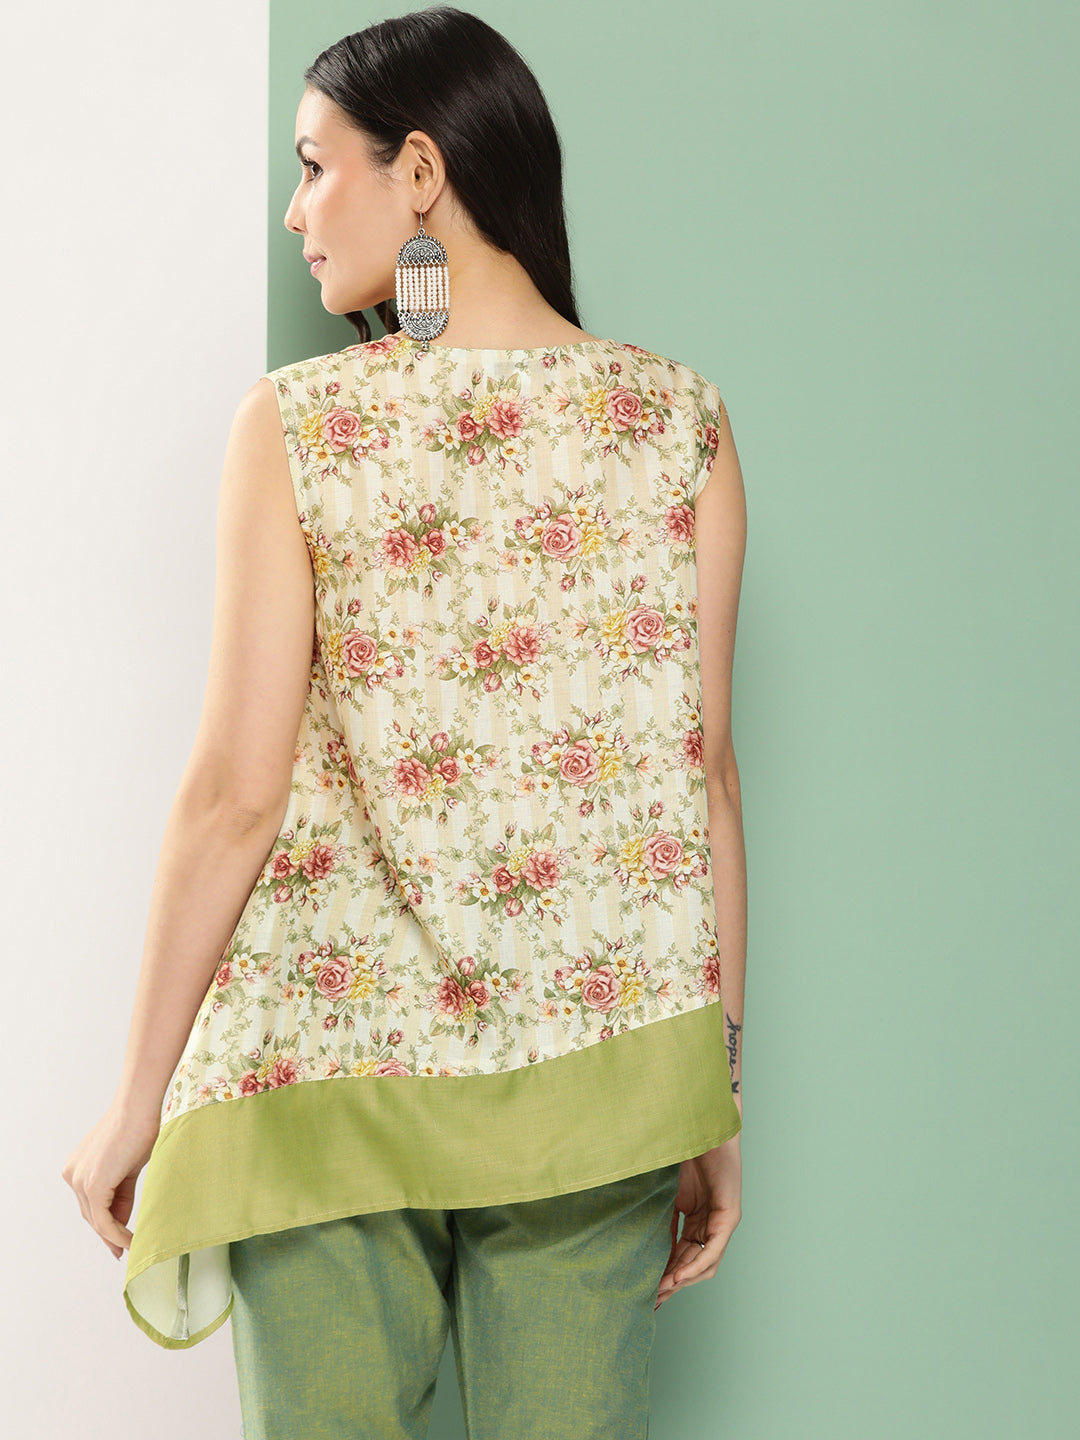 Bhama Couture Beige Flowal Prined Asymmetrical Top